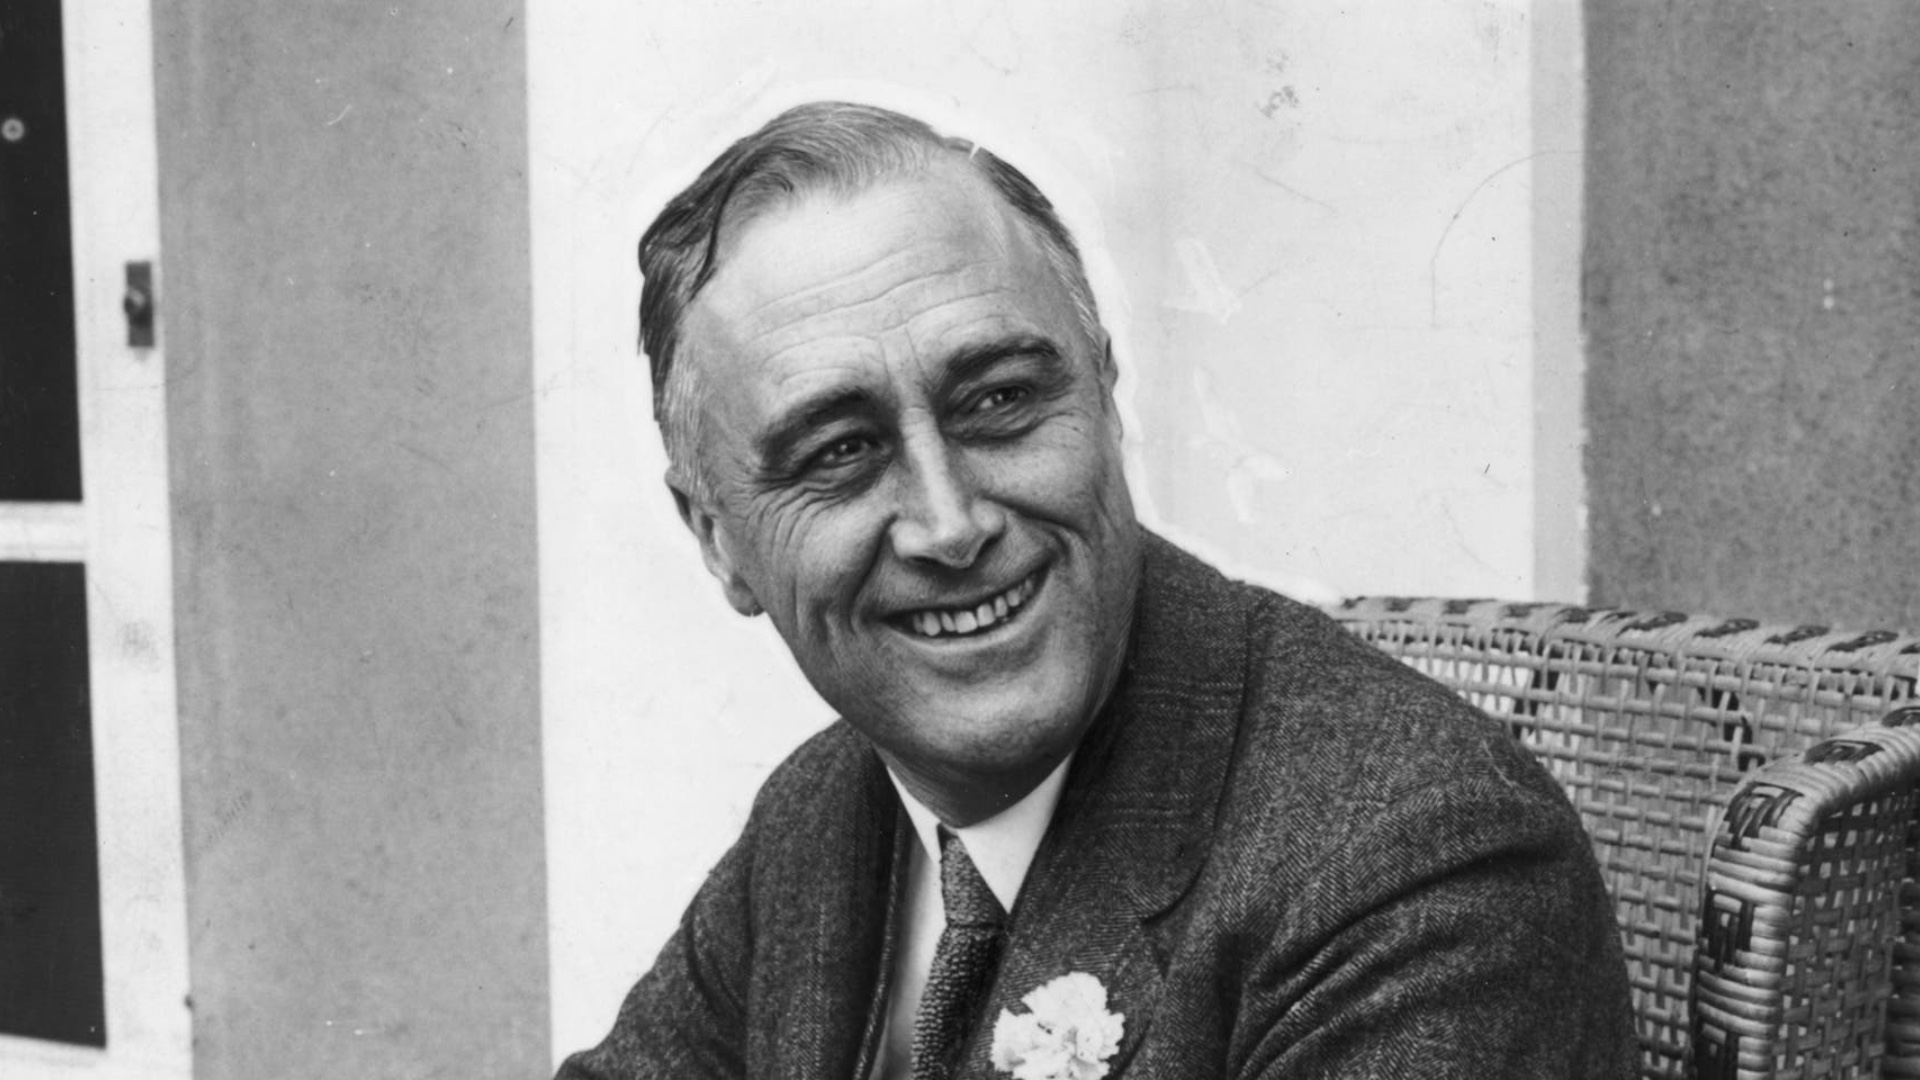 Read More About FDR